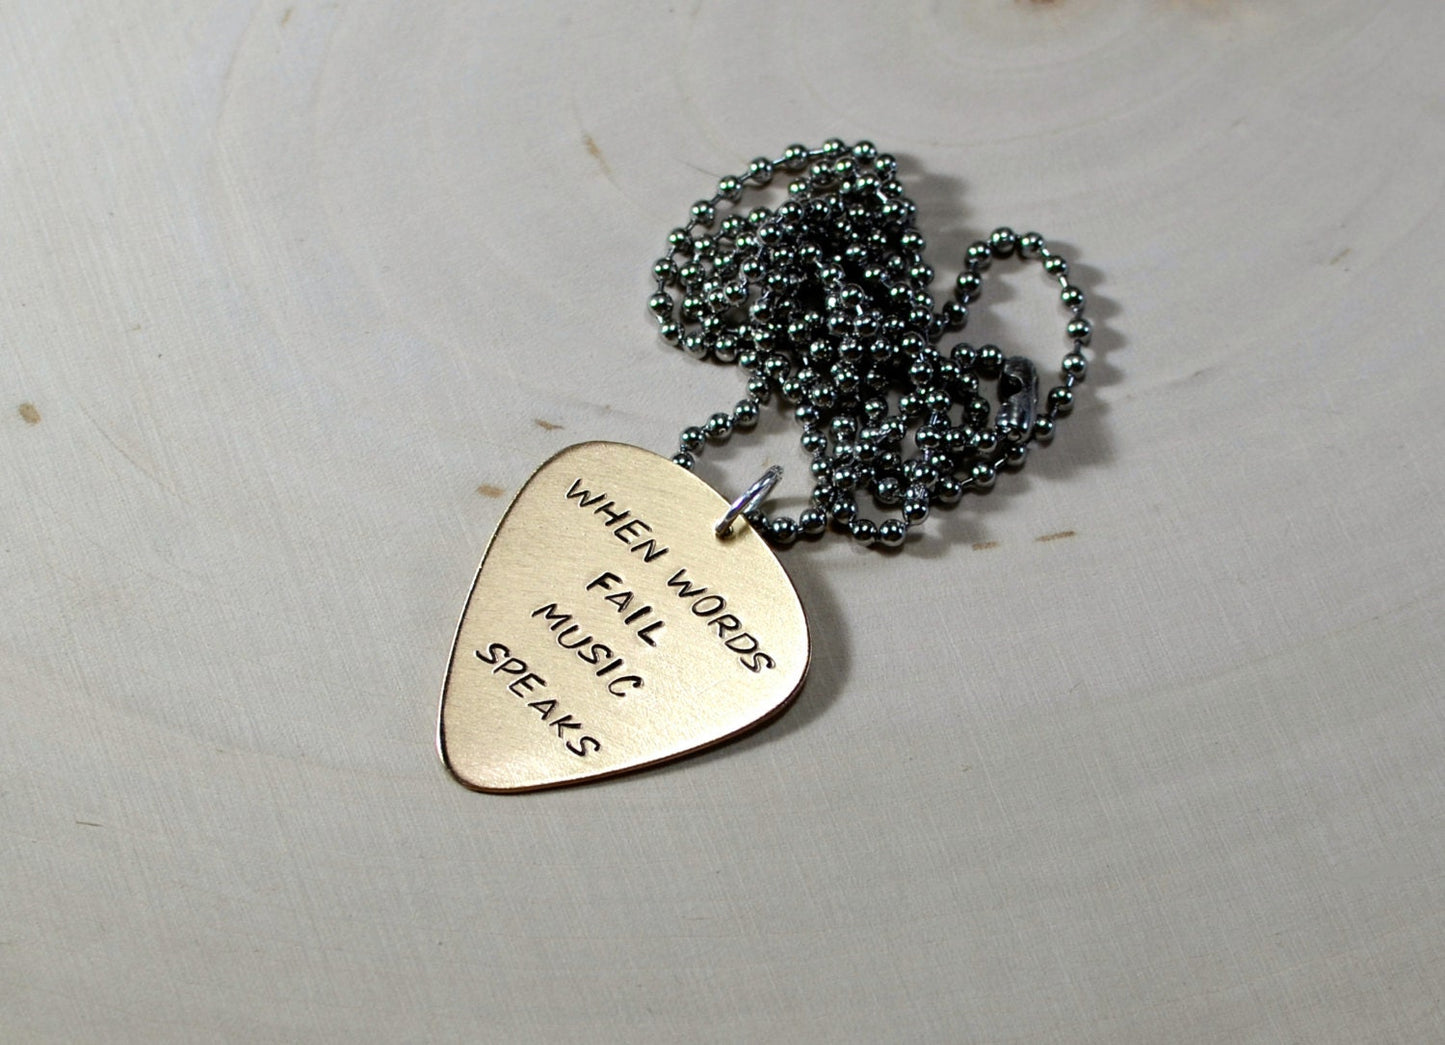 Bronze guitar pick necklace stamped with When words fail music speaks